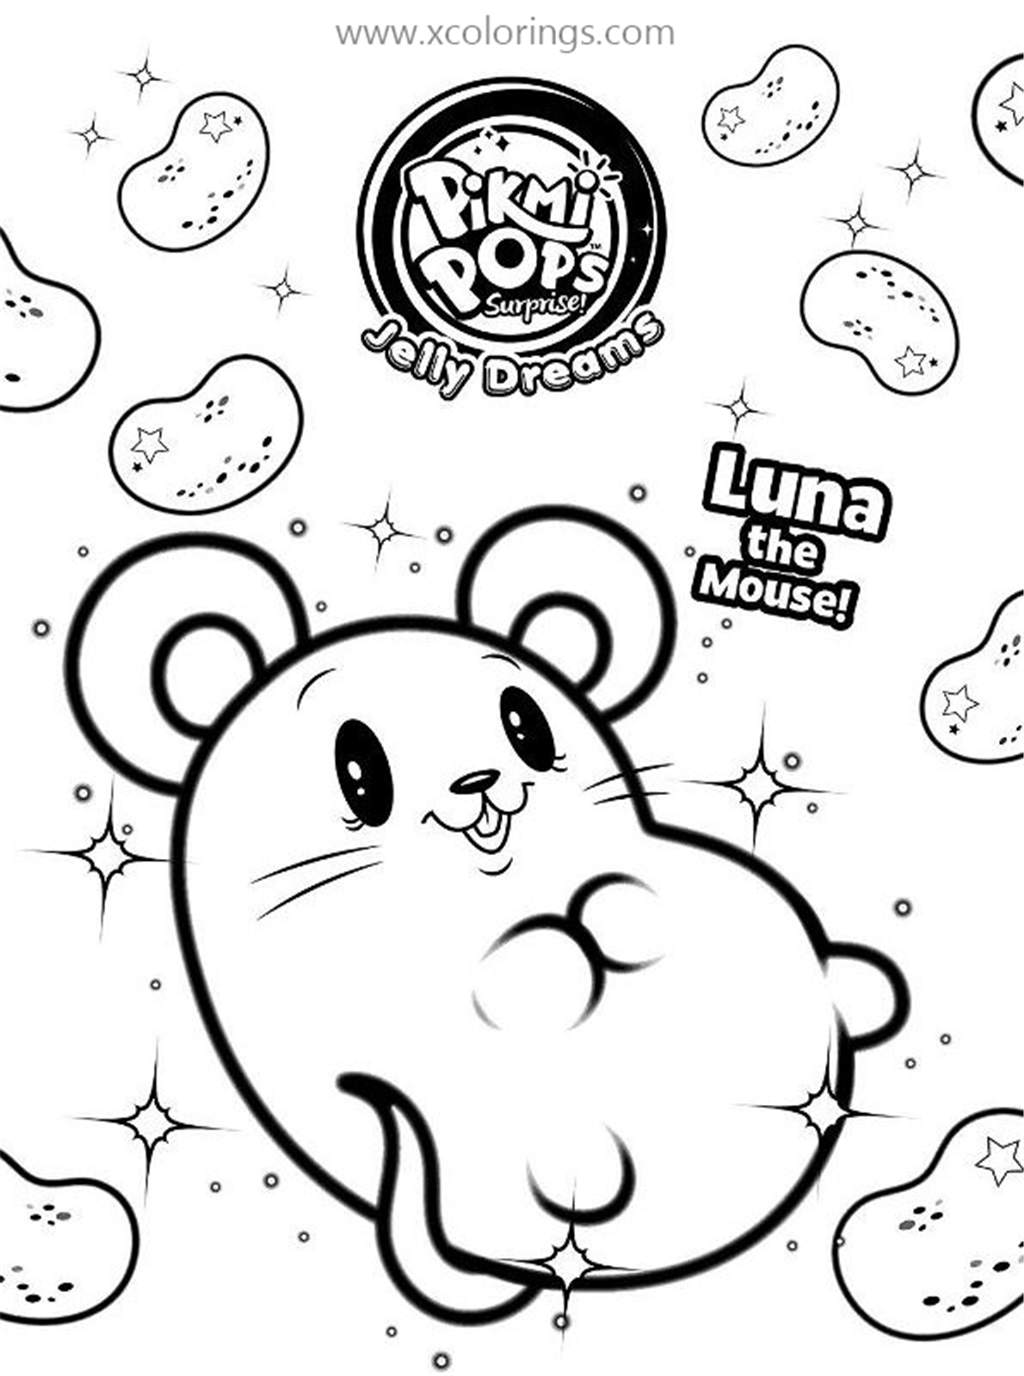 Free Pikmi Pops Coloring Pages Luna the Mouse printable